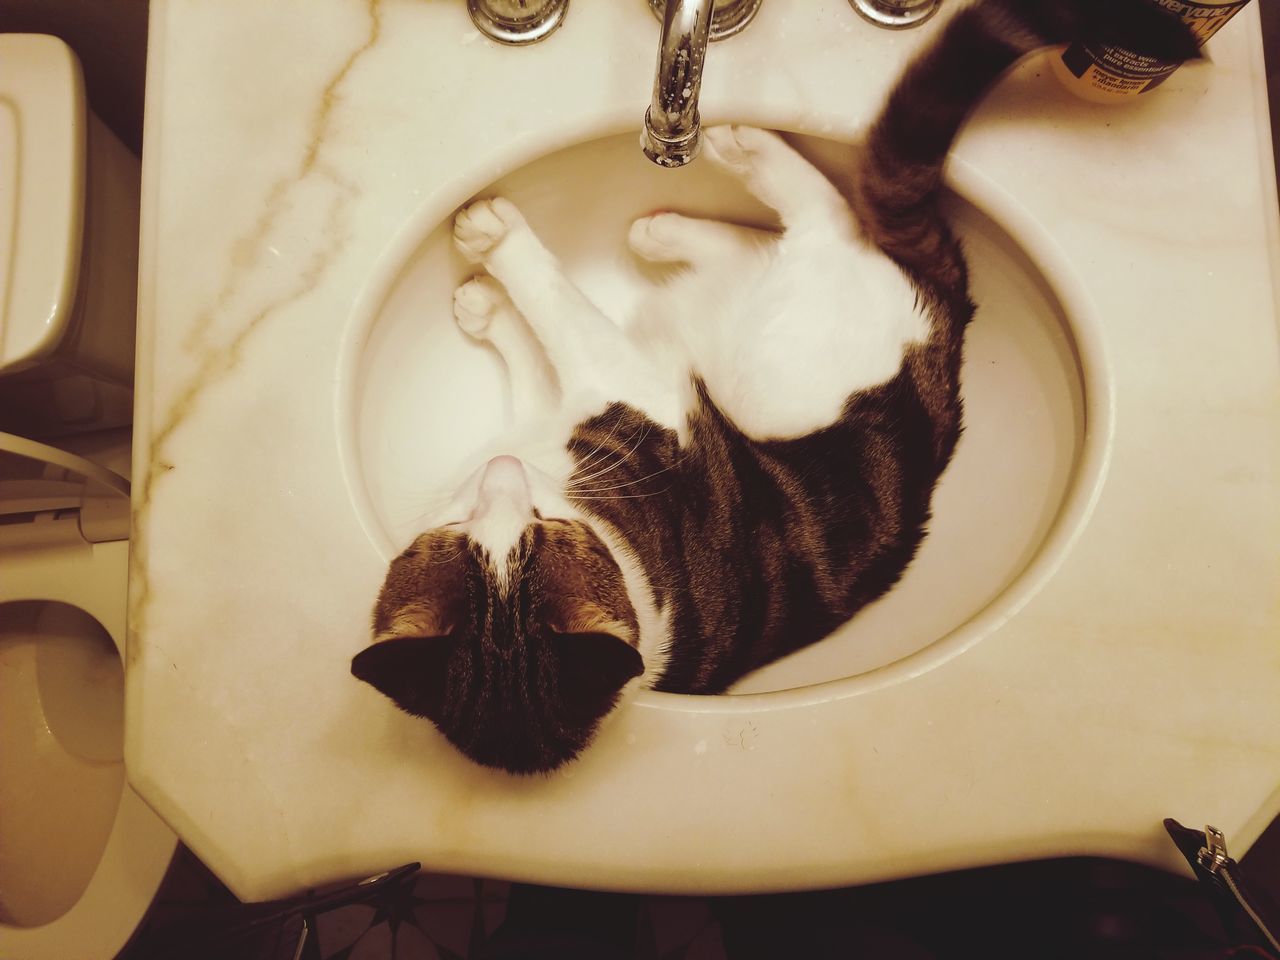 HIGH ANGLE VIEW OF A CAT DRINKING FROM A CUP